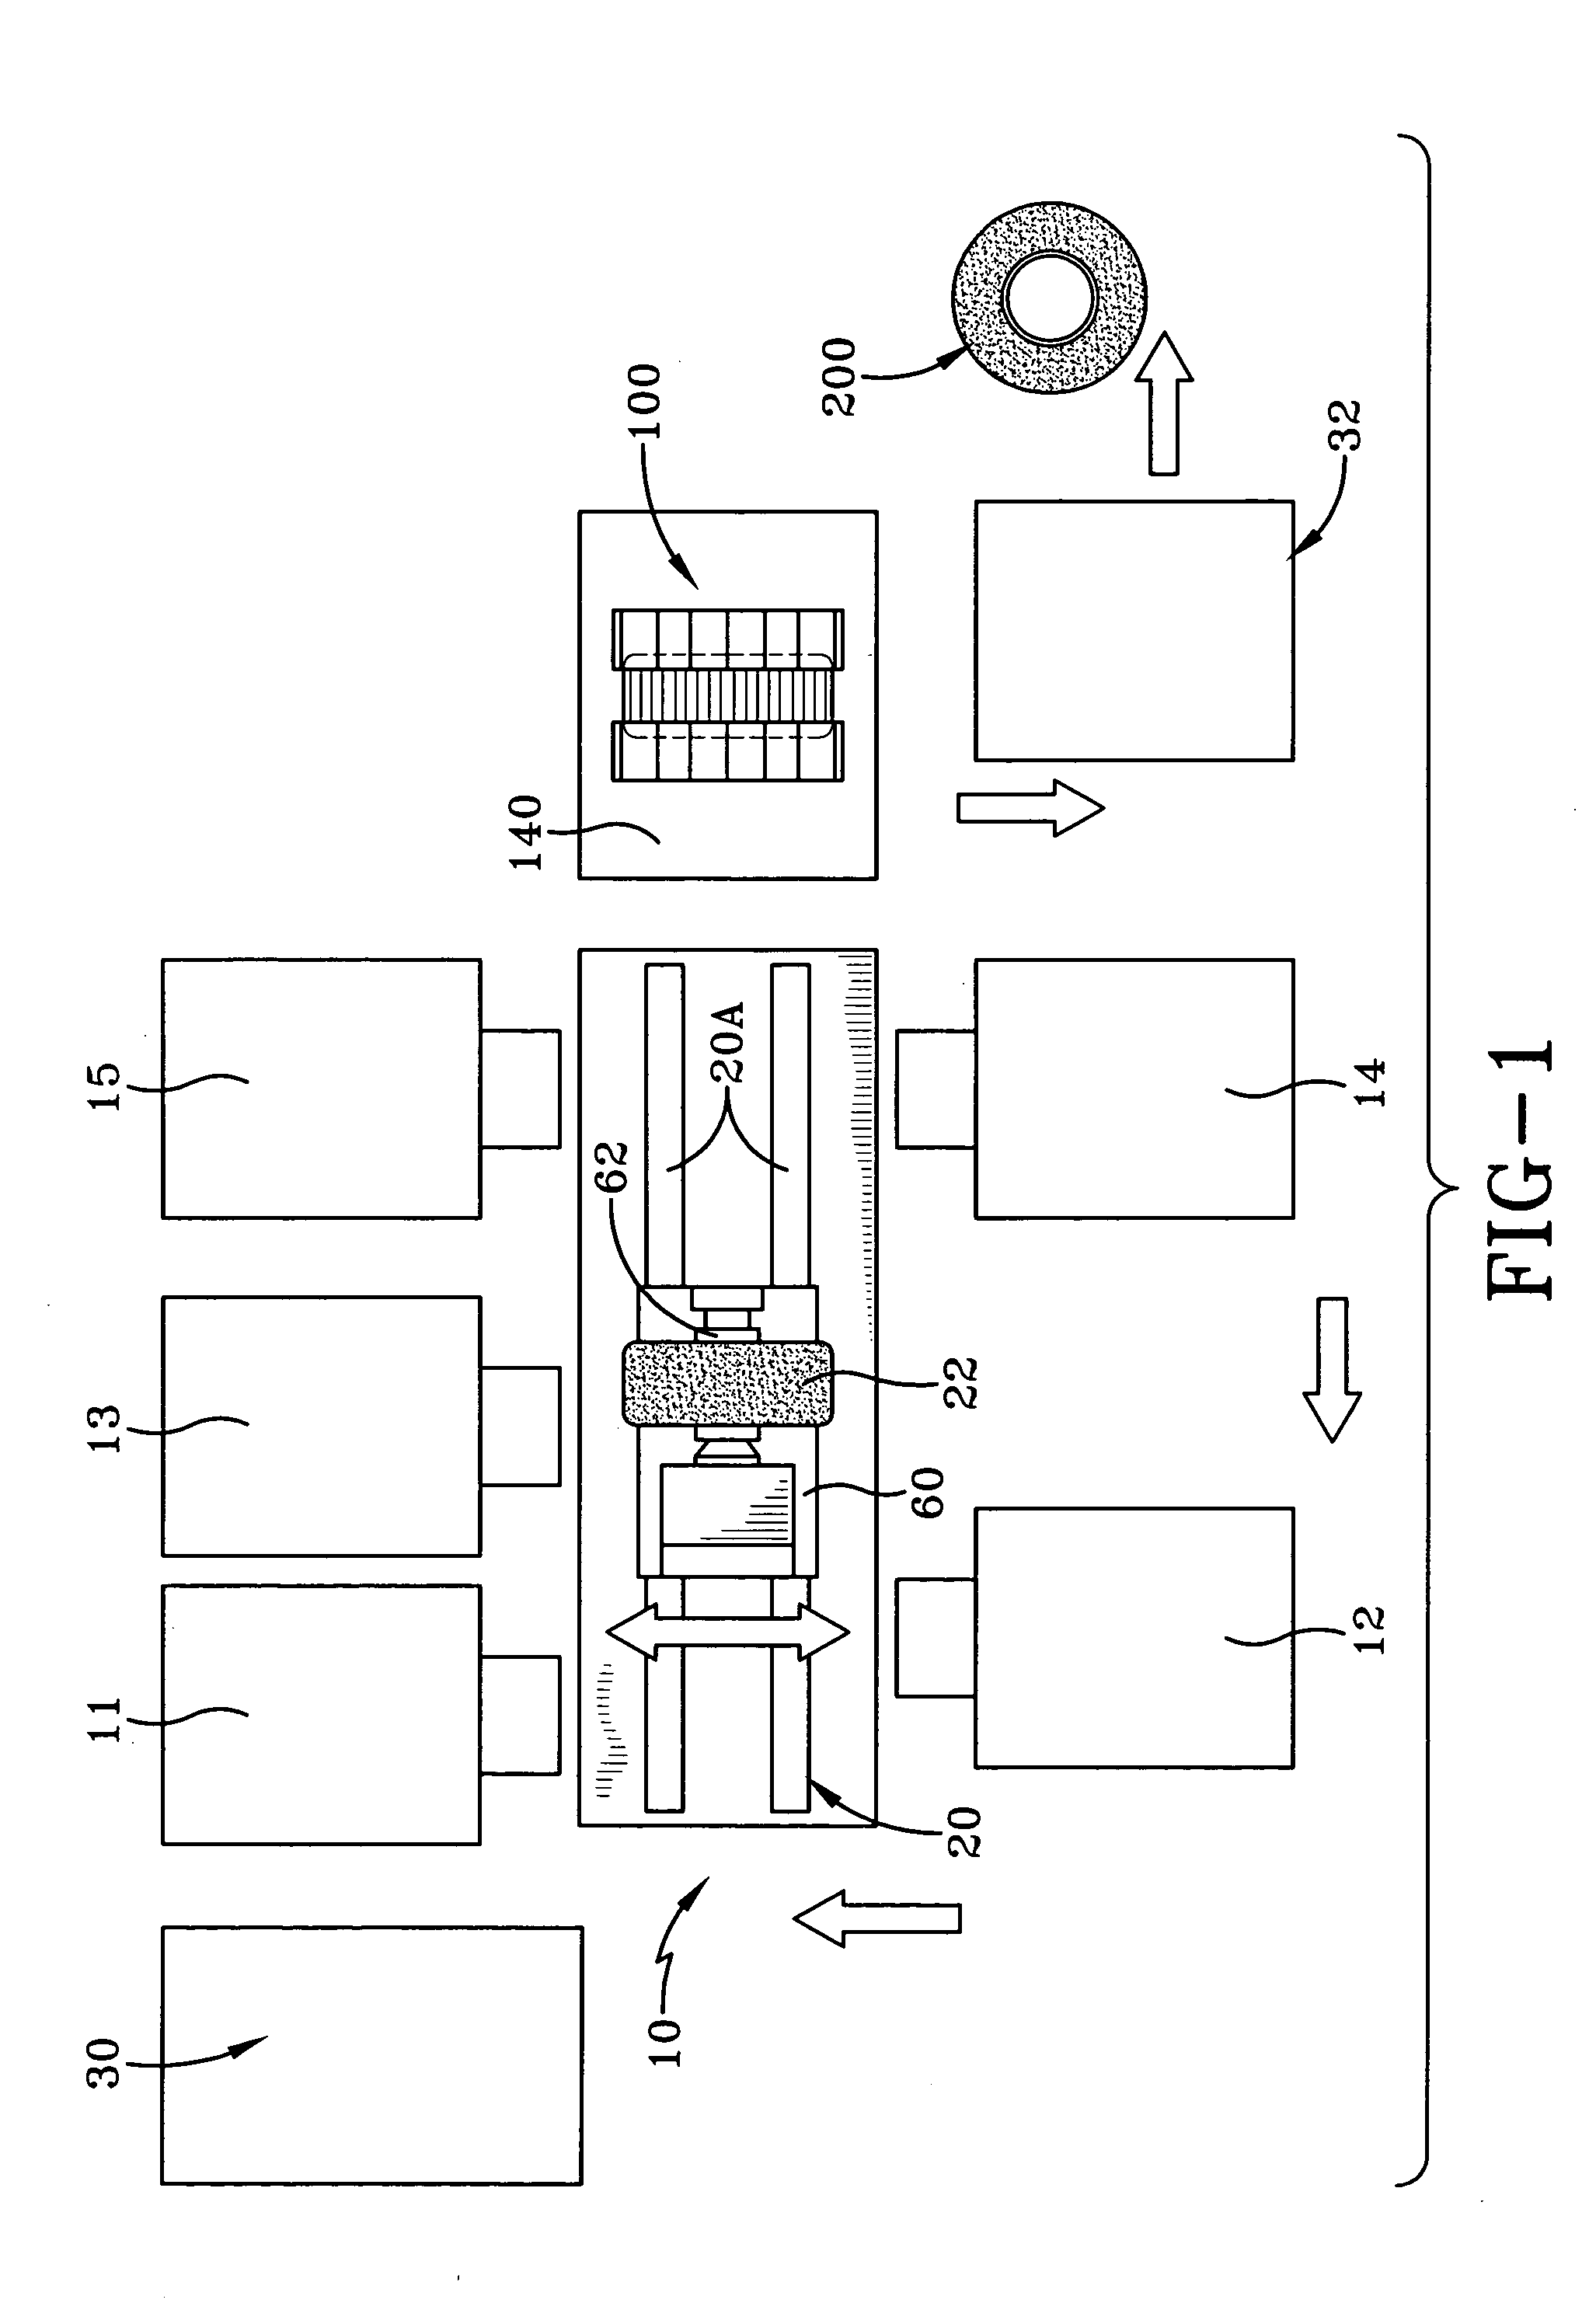 Tire manufacturing module and method of manufacturing tires